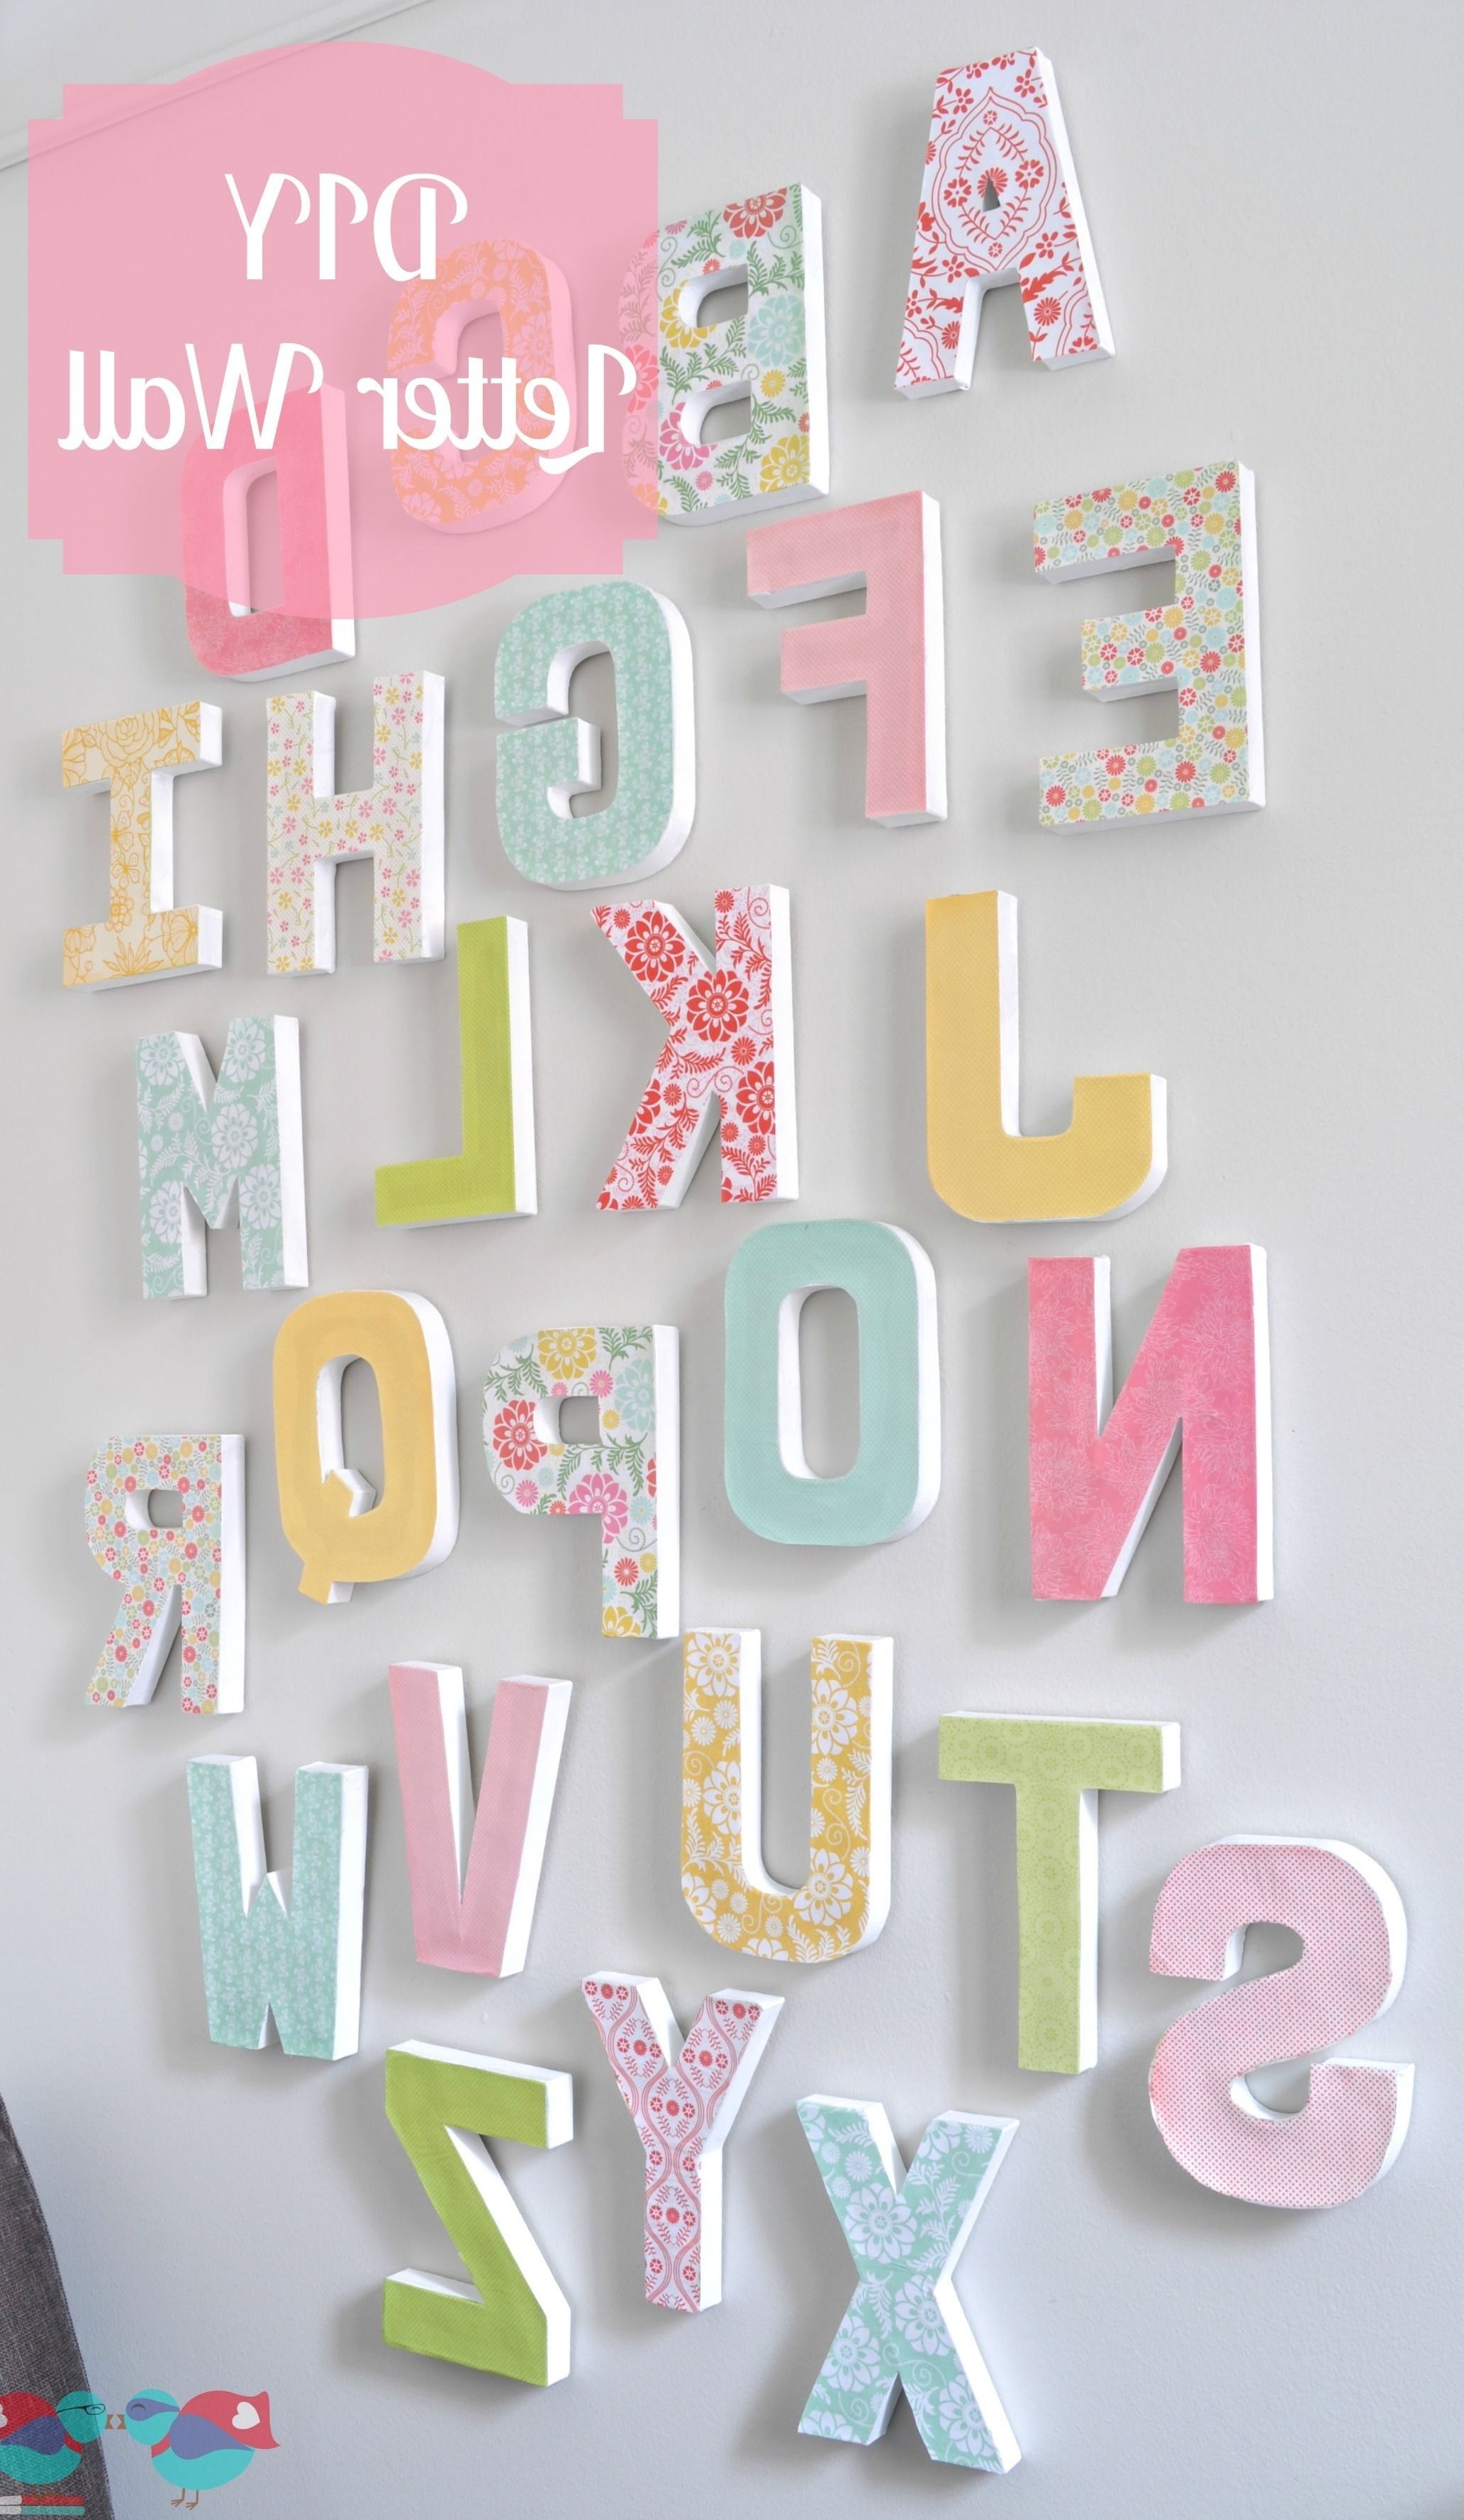 Diy Letters, Letter Wall And Letter Wall Art With Regard To Fashionable Wall Art Letters Uk (View 2 of 15)